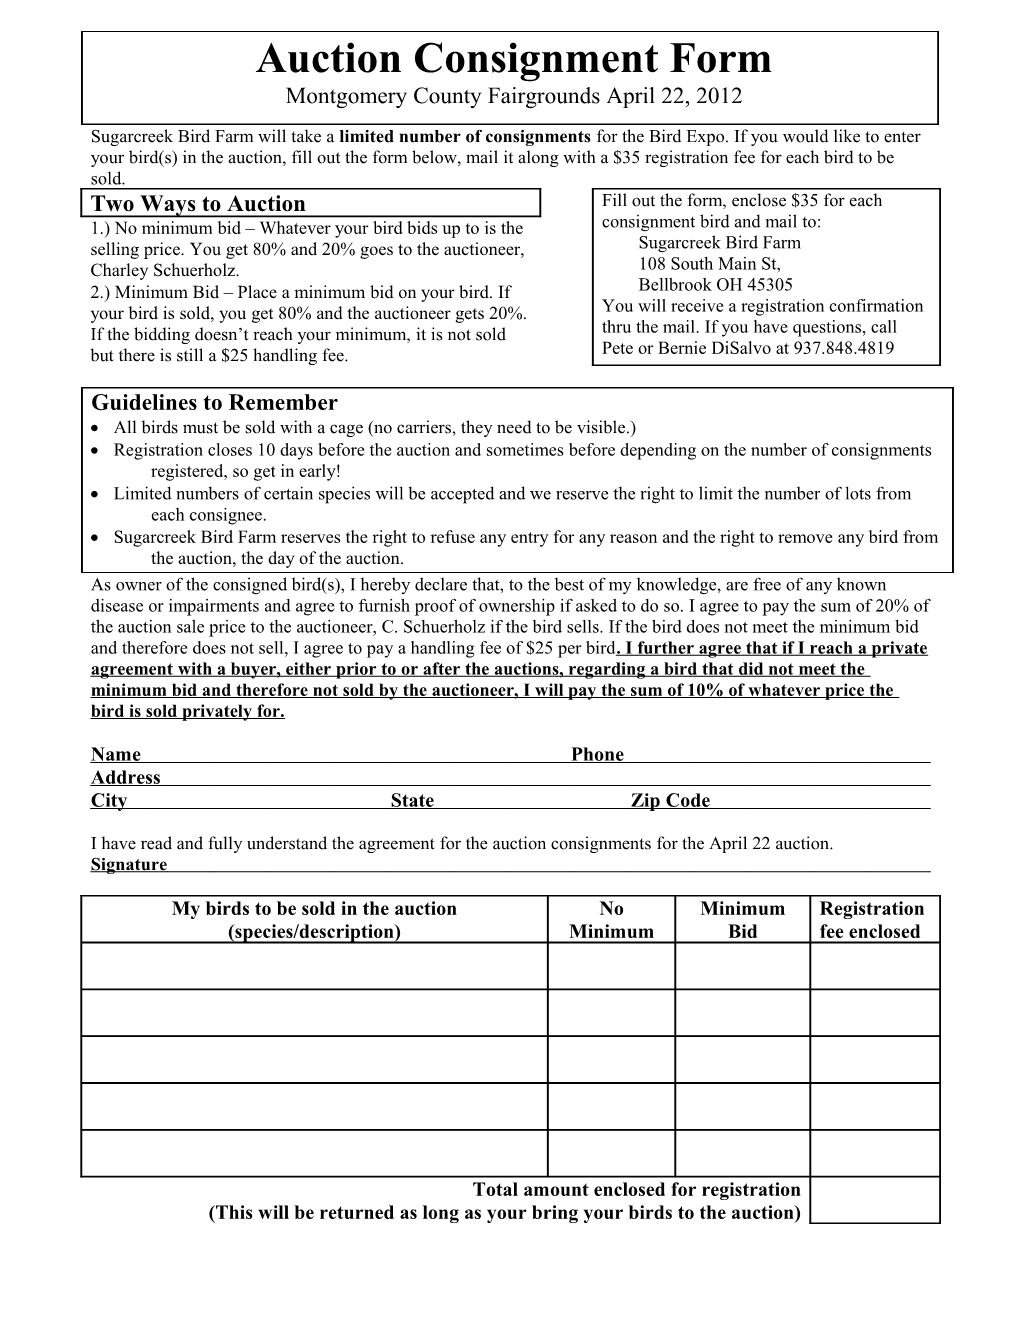 Auction Consignment Form